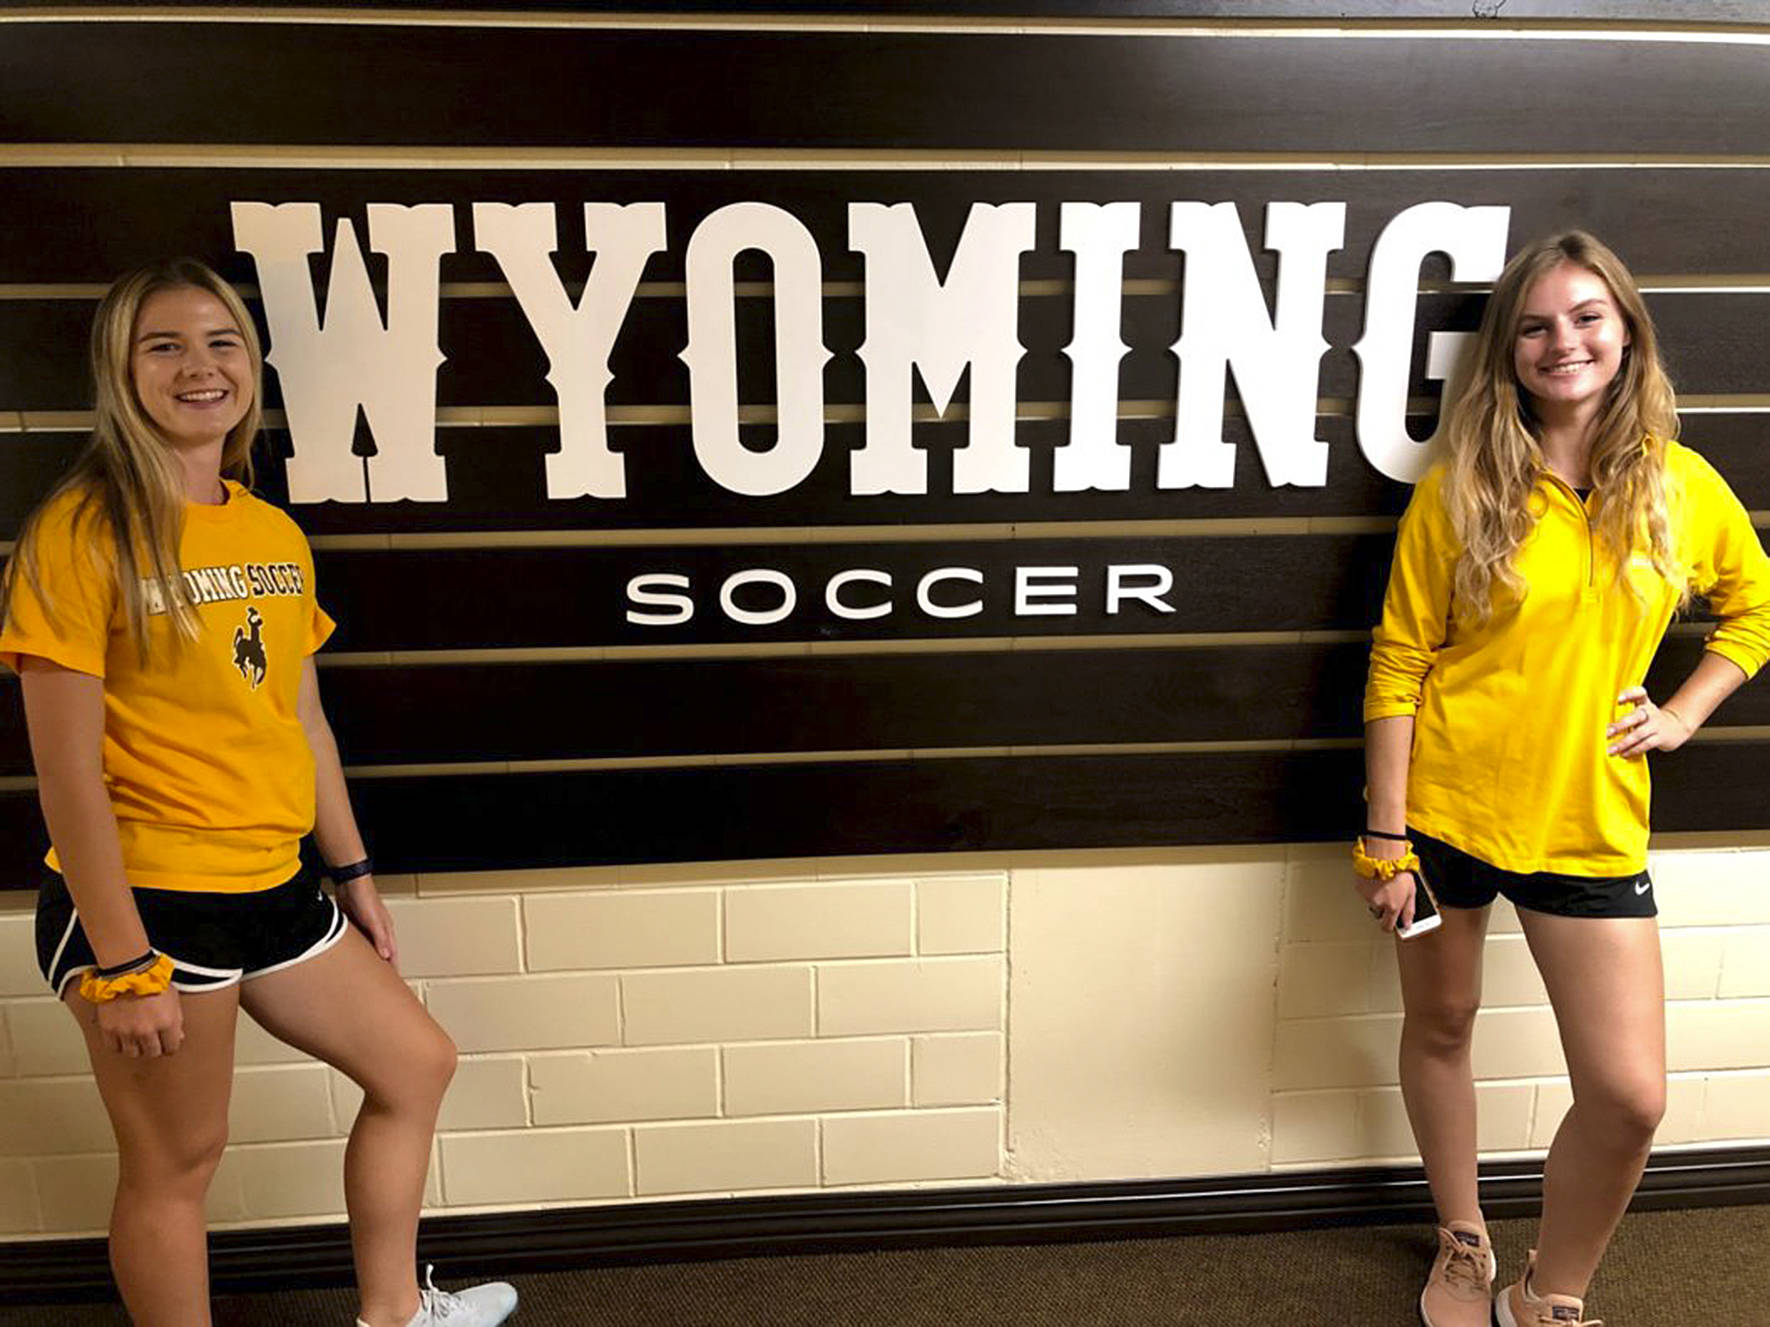 Courtesy of Lynn Gerking. Rae Gerking and Nikayla Copenhaver have been friends since playing soccer against each other at six years old. Now they will play together and be roommates at University of Wyoming.